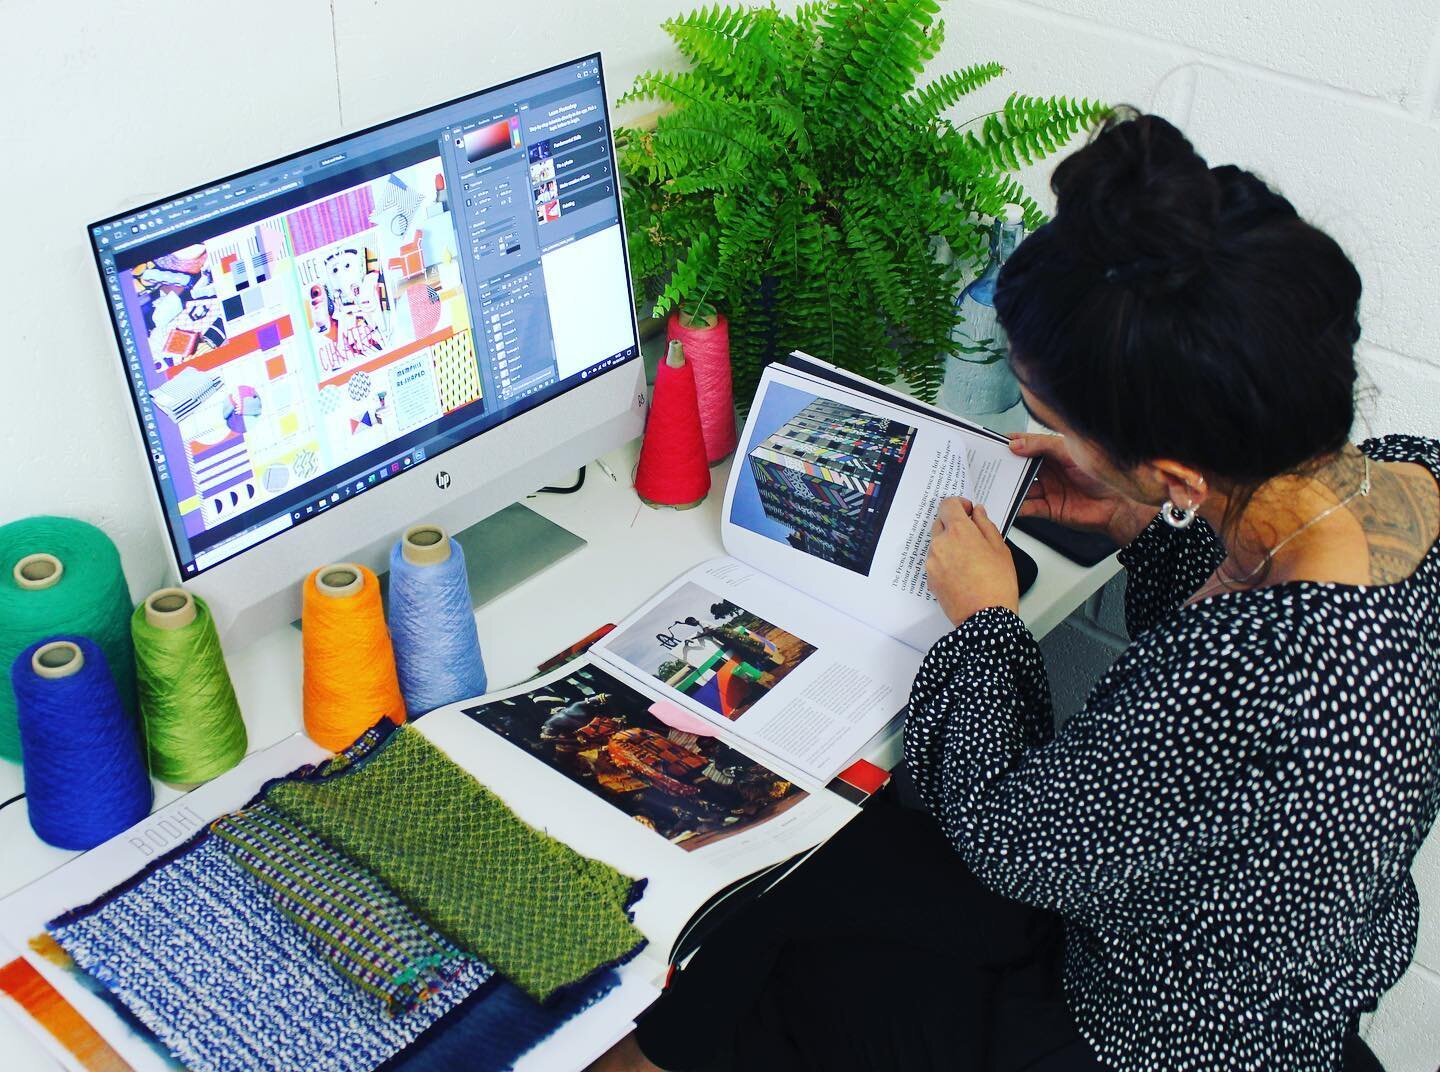 Tasha working hard in the studio 👩🏻&zwj;💻🧶 In response to covid-19 we are increasing our design consultancy and providing for clients online 🌏 #textiles #design #inspiration #interiors #fashion #fabrics #trend #style #studio #trendforcasting